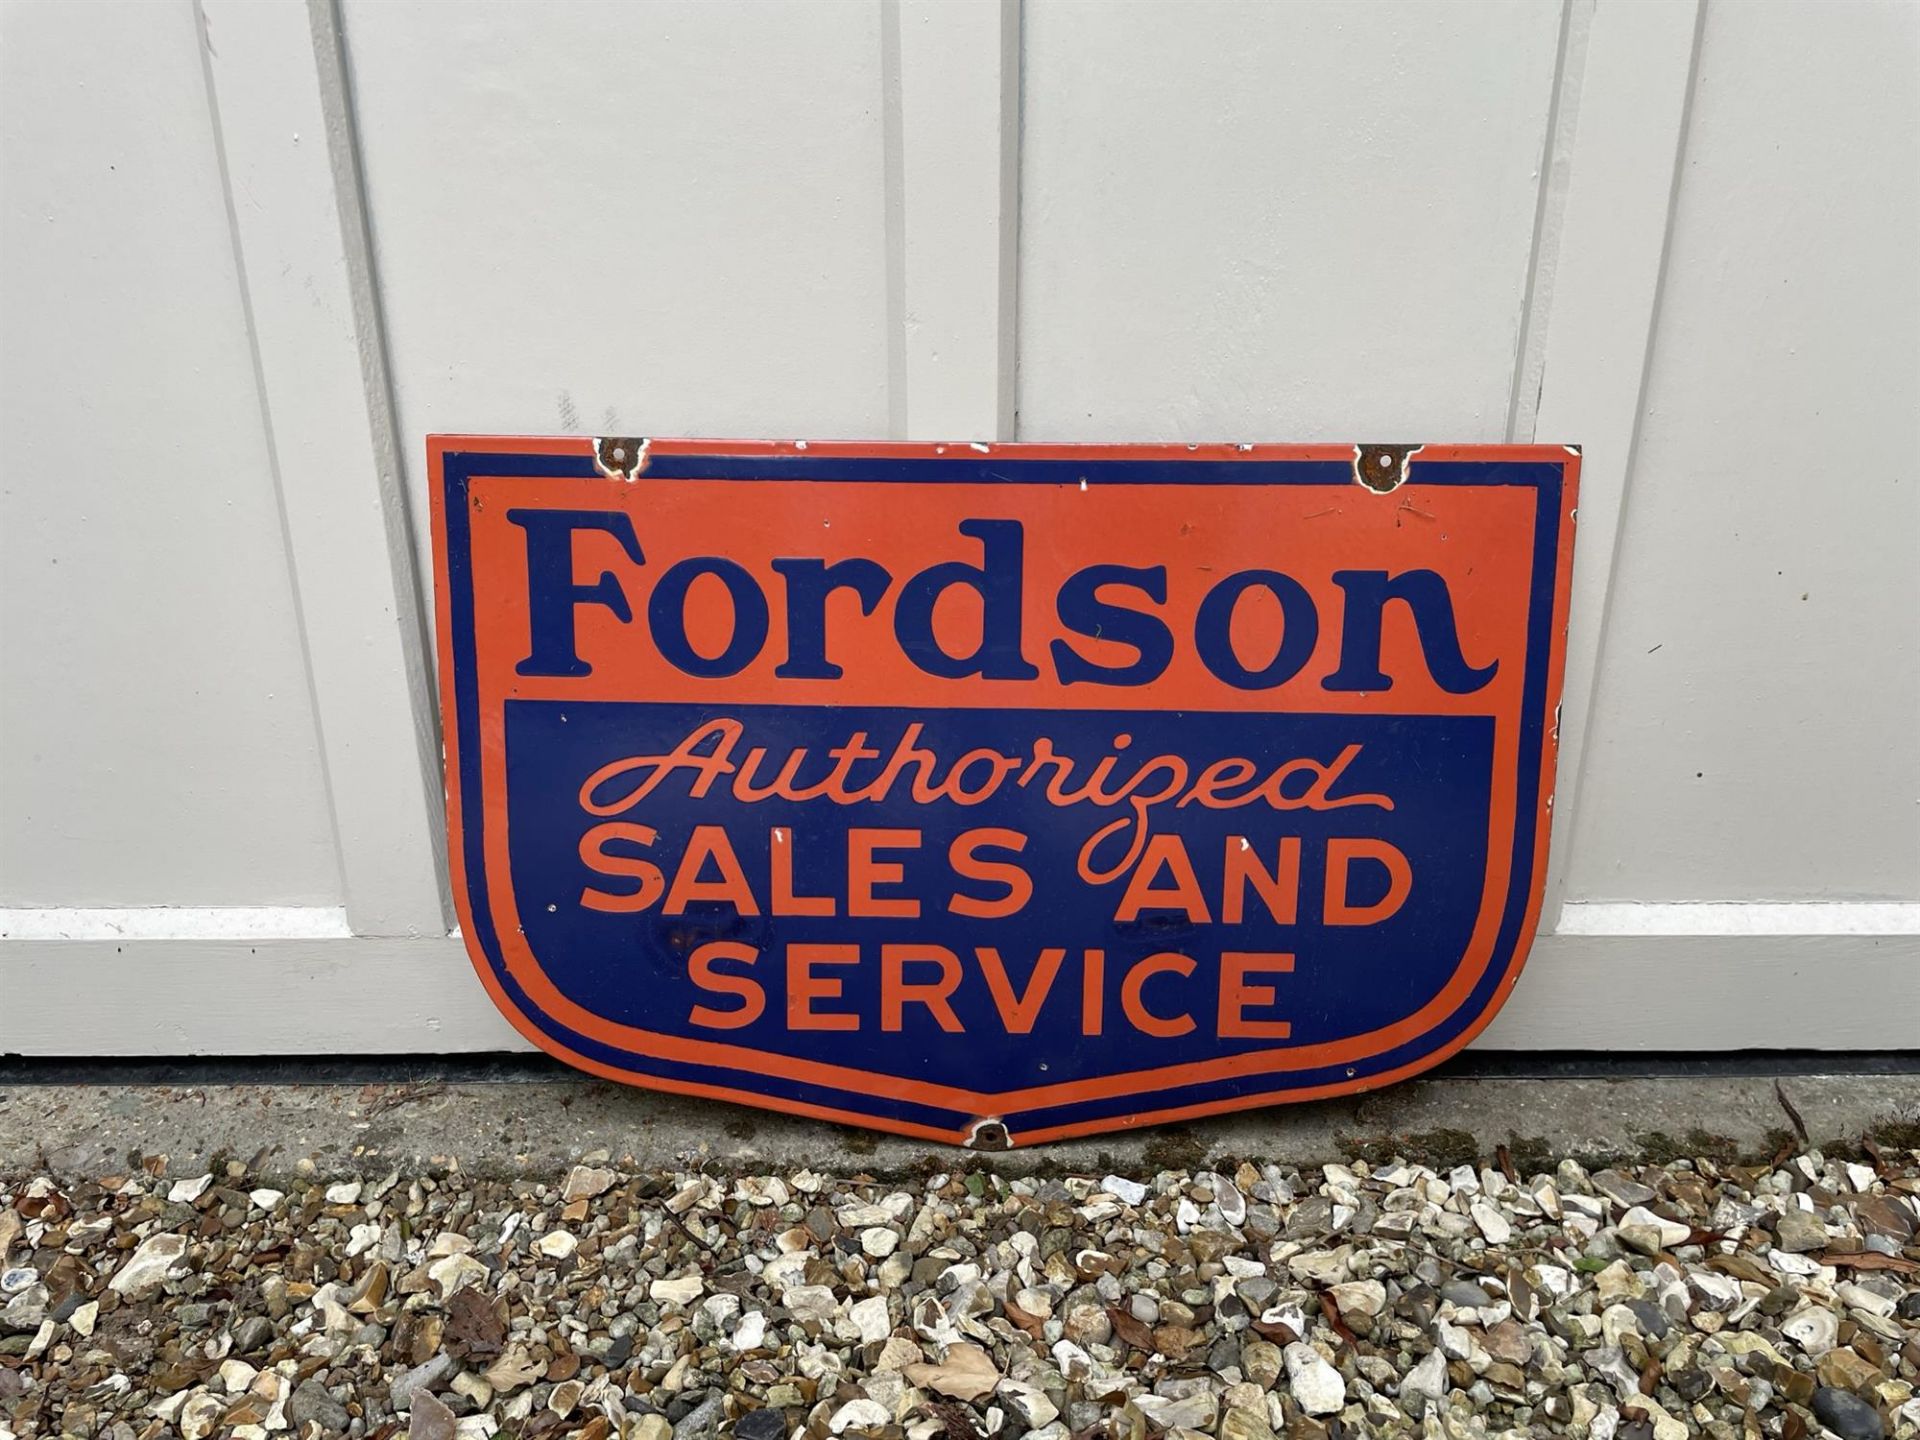 Fordson Sales and Service Contemporary Enamel Sign - Image 5 of 5